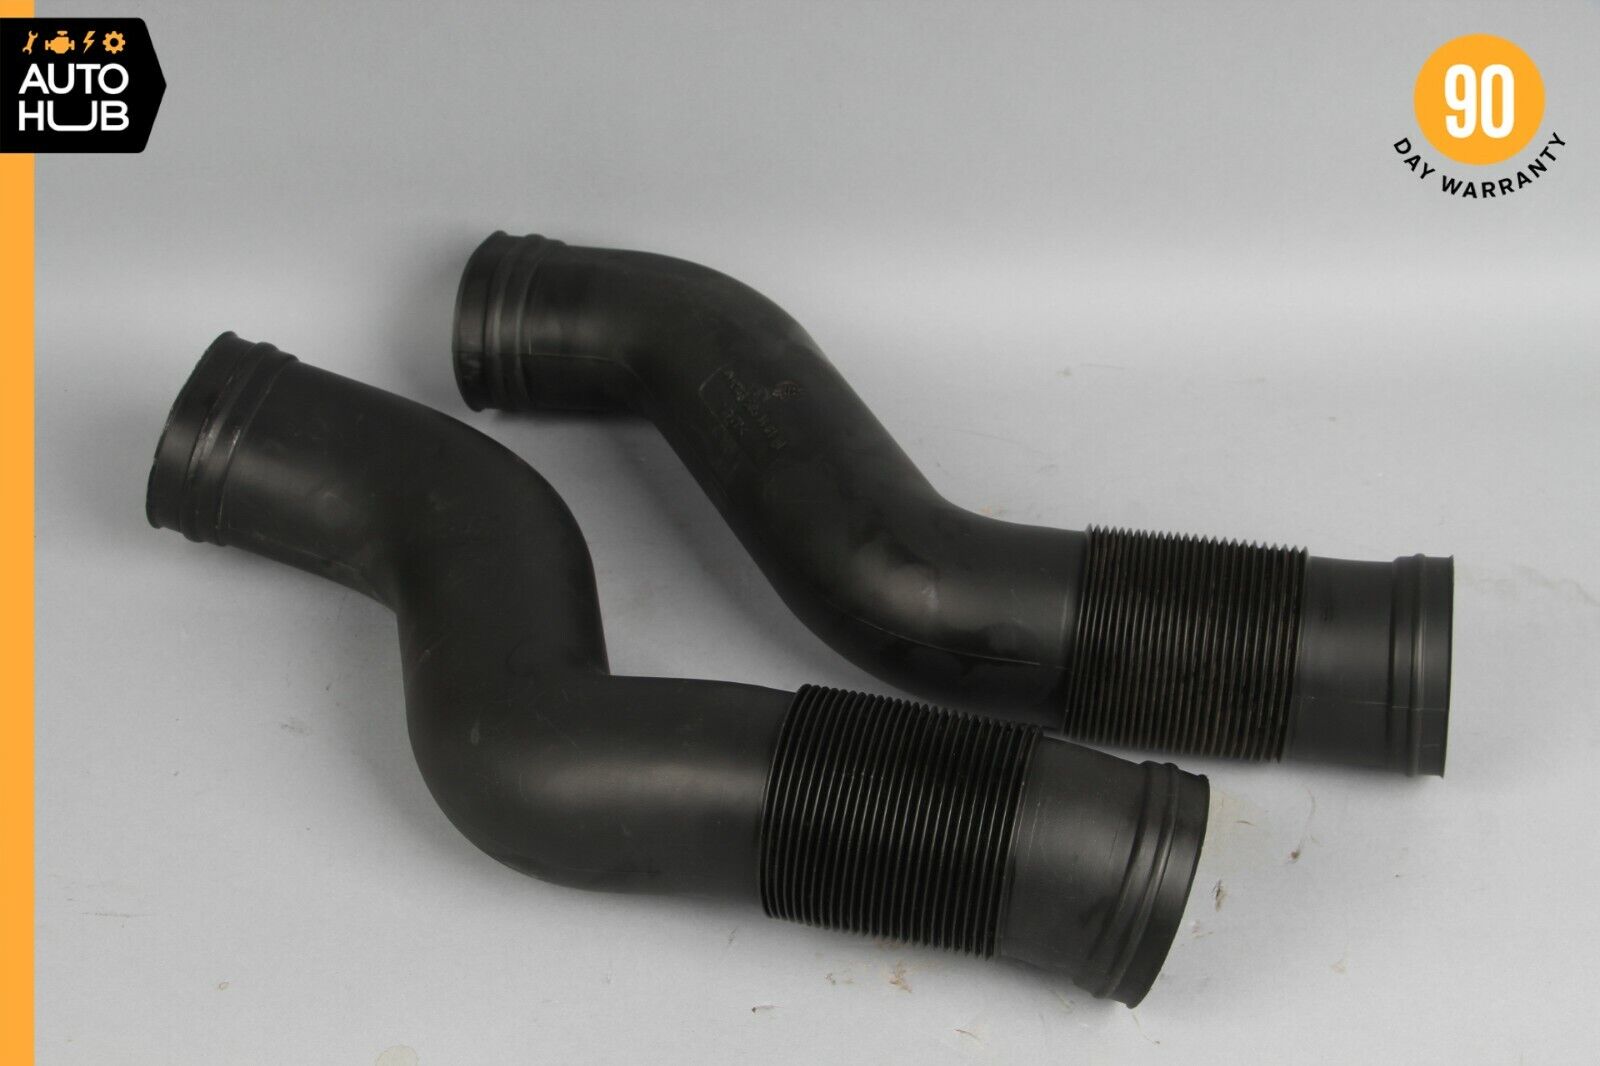 06-12 Mercedes X164 GL550 ML500 Air Intake Duct Pipe Hose Right & Left Set OEM